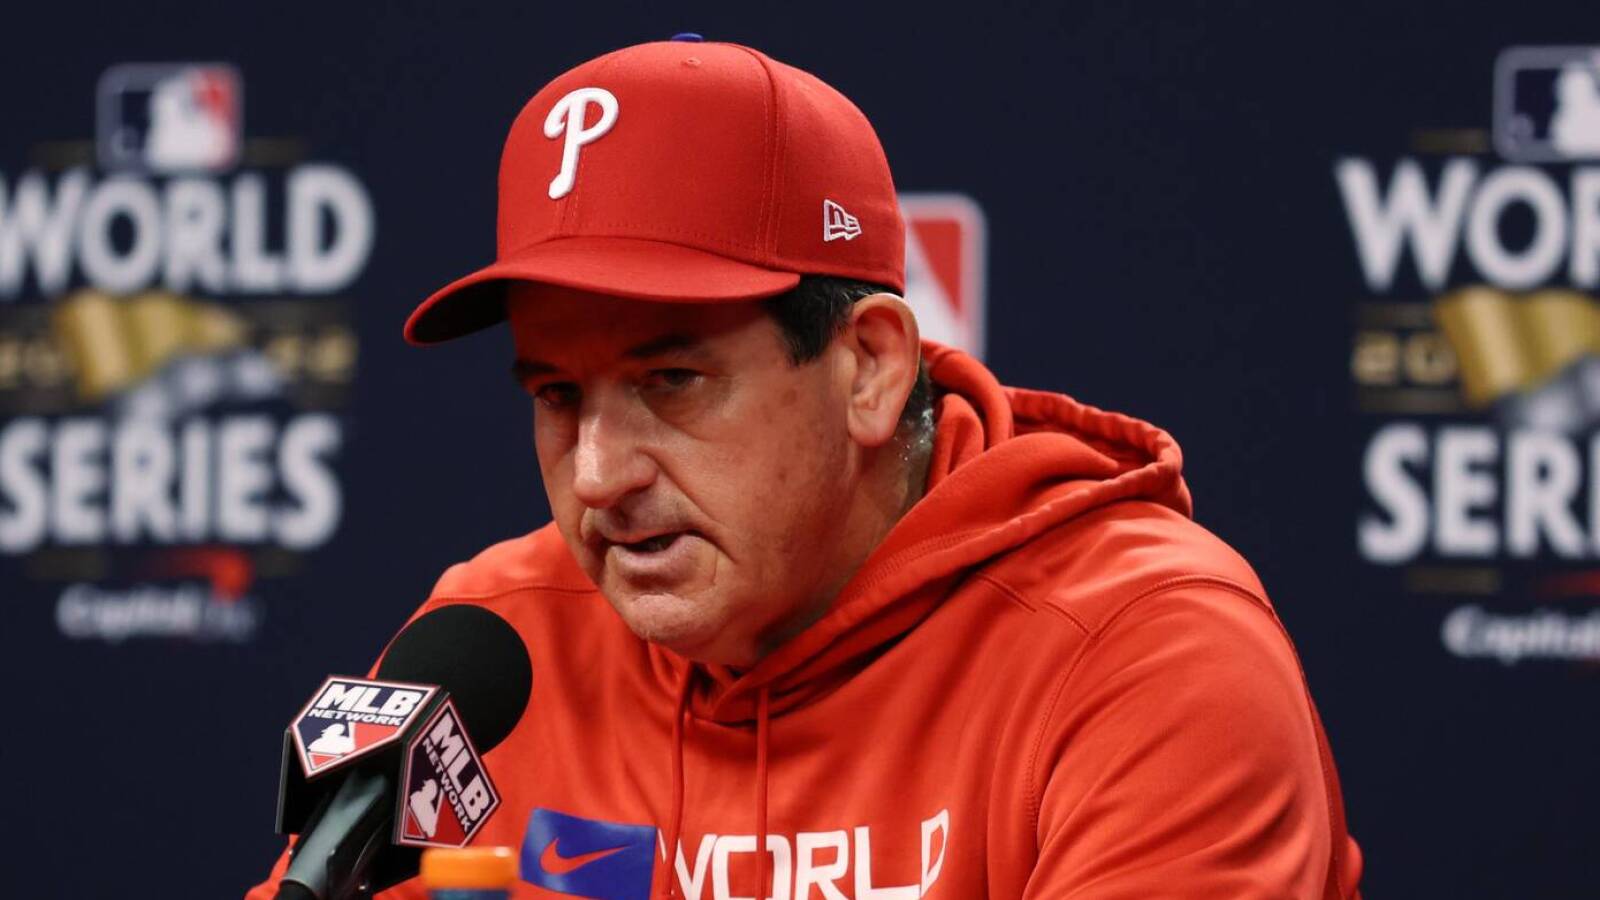 Phillies manager Rob Thomson gives World Series rotation update ahead of must-win Game 6